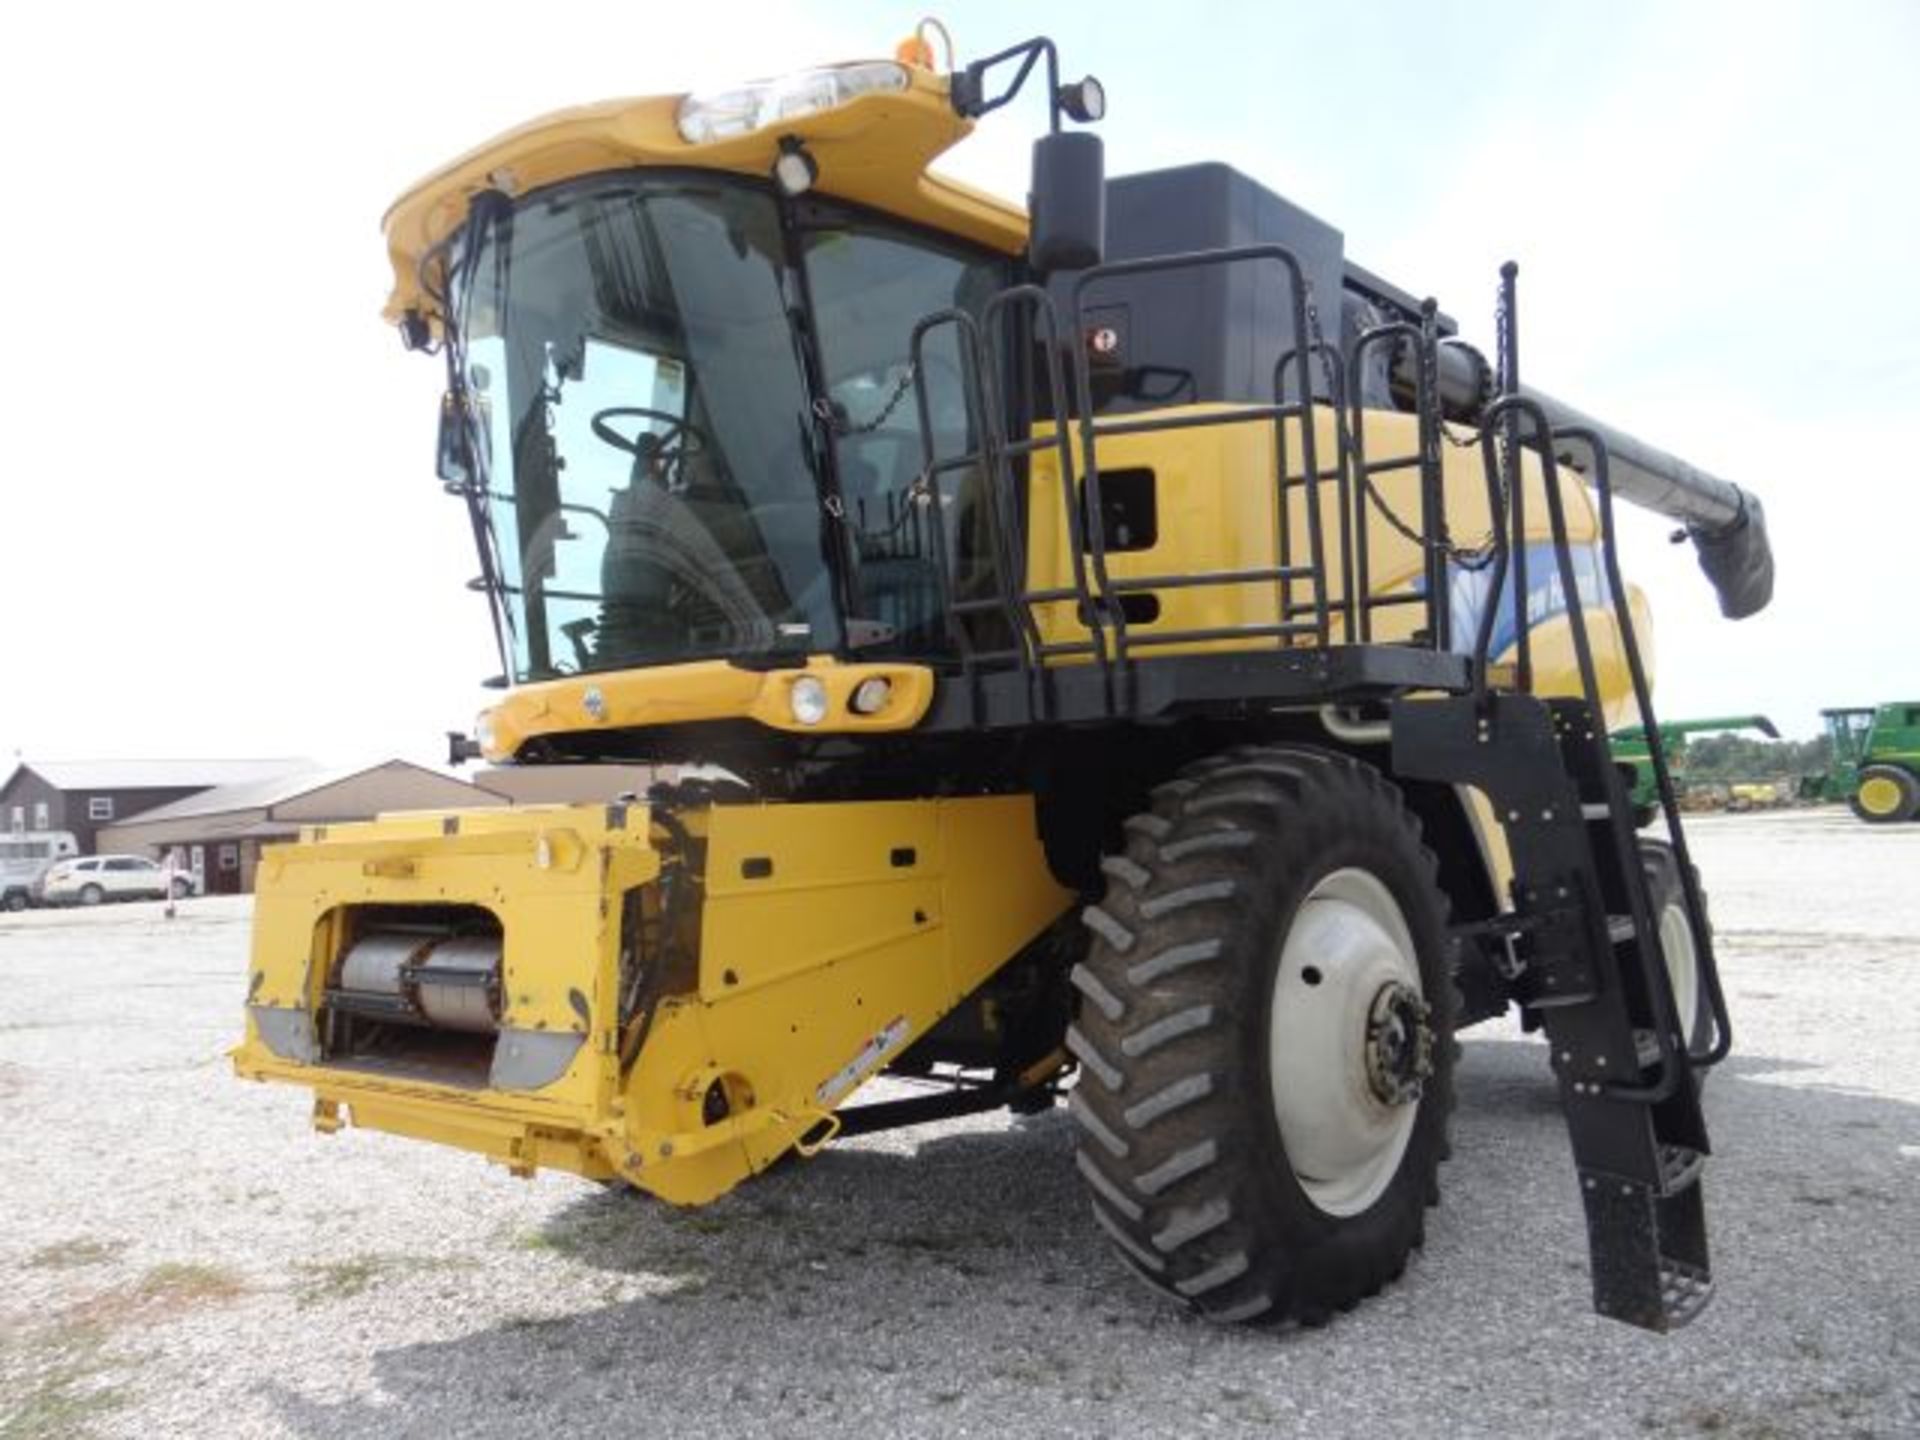 NH CR9060 Combine, 2008 #112630, 2688/1954 hrs, 4wd, 520/85R42 Firestone Duals on Front, Terrain